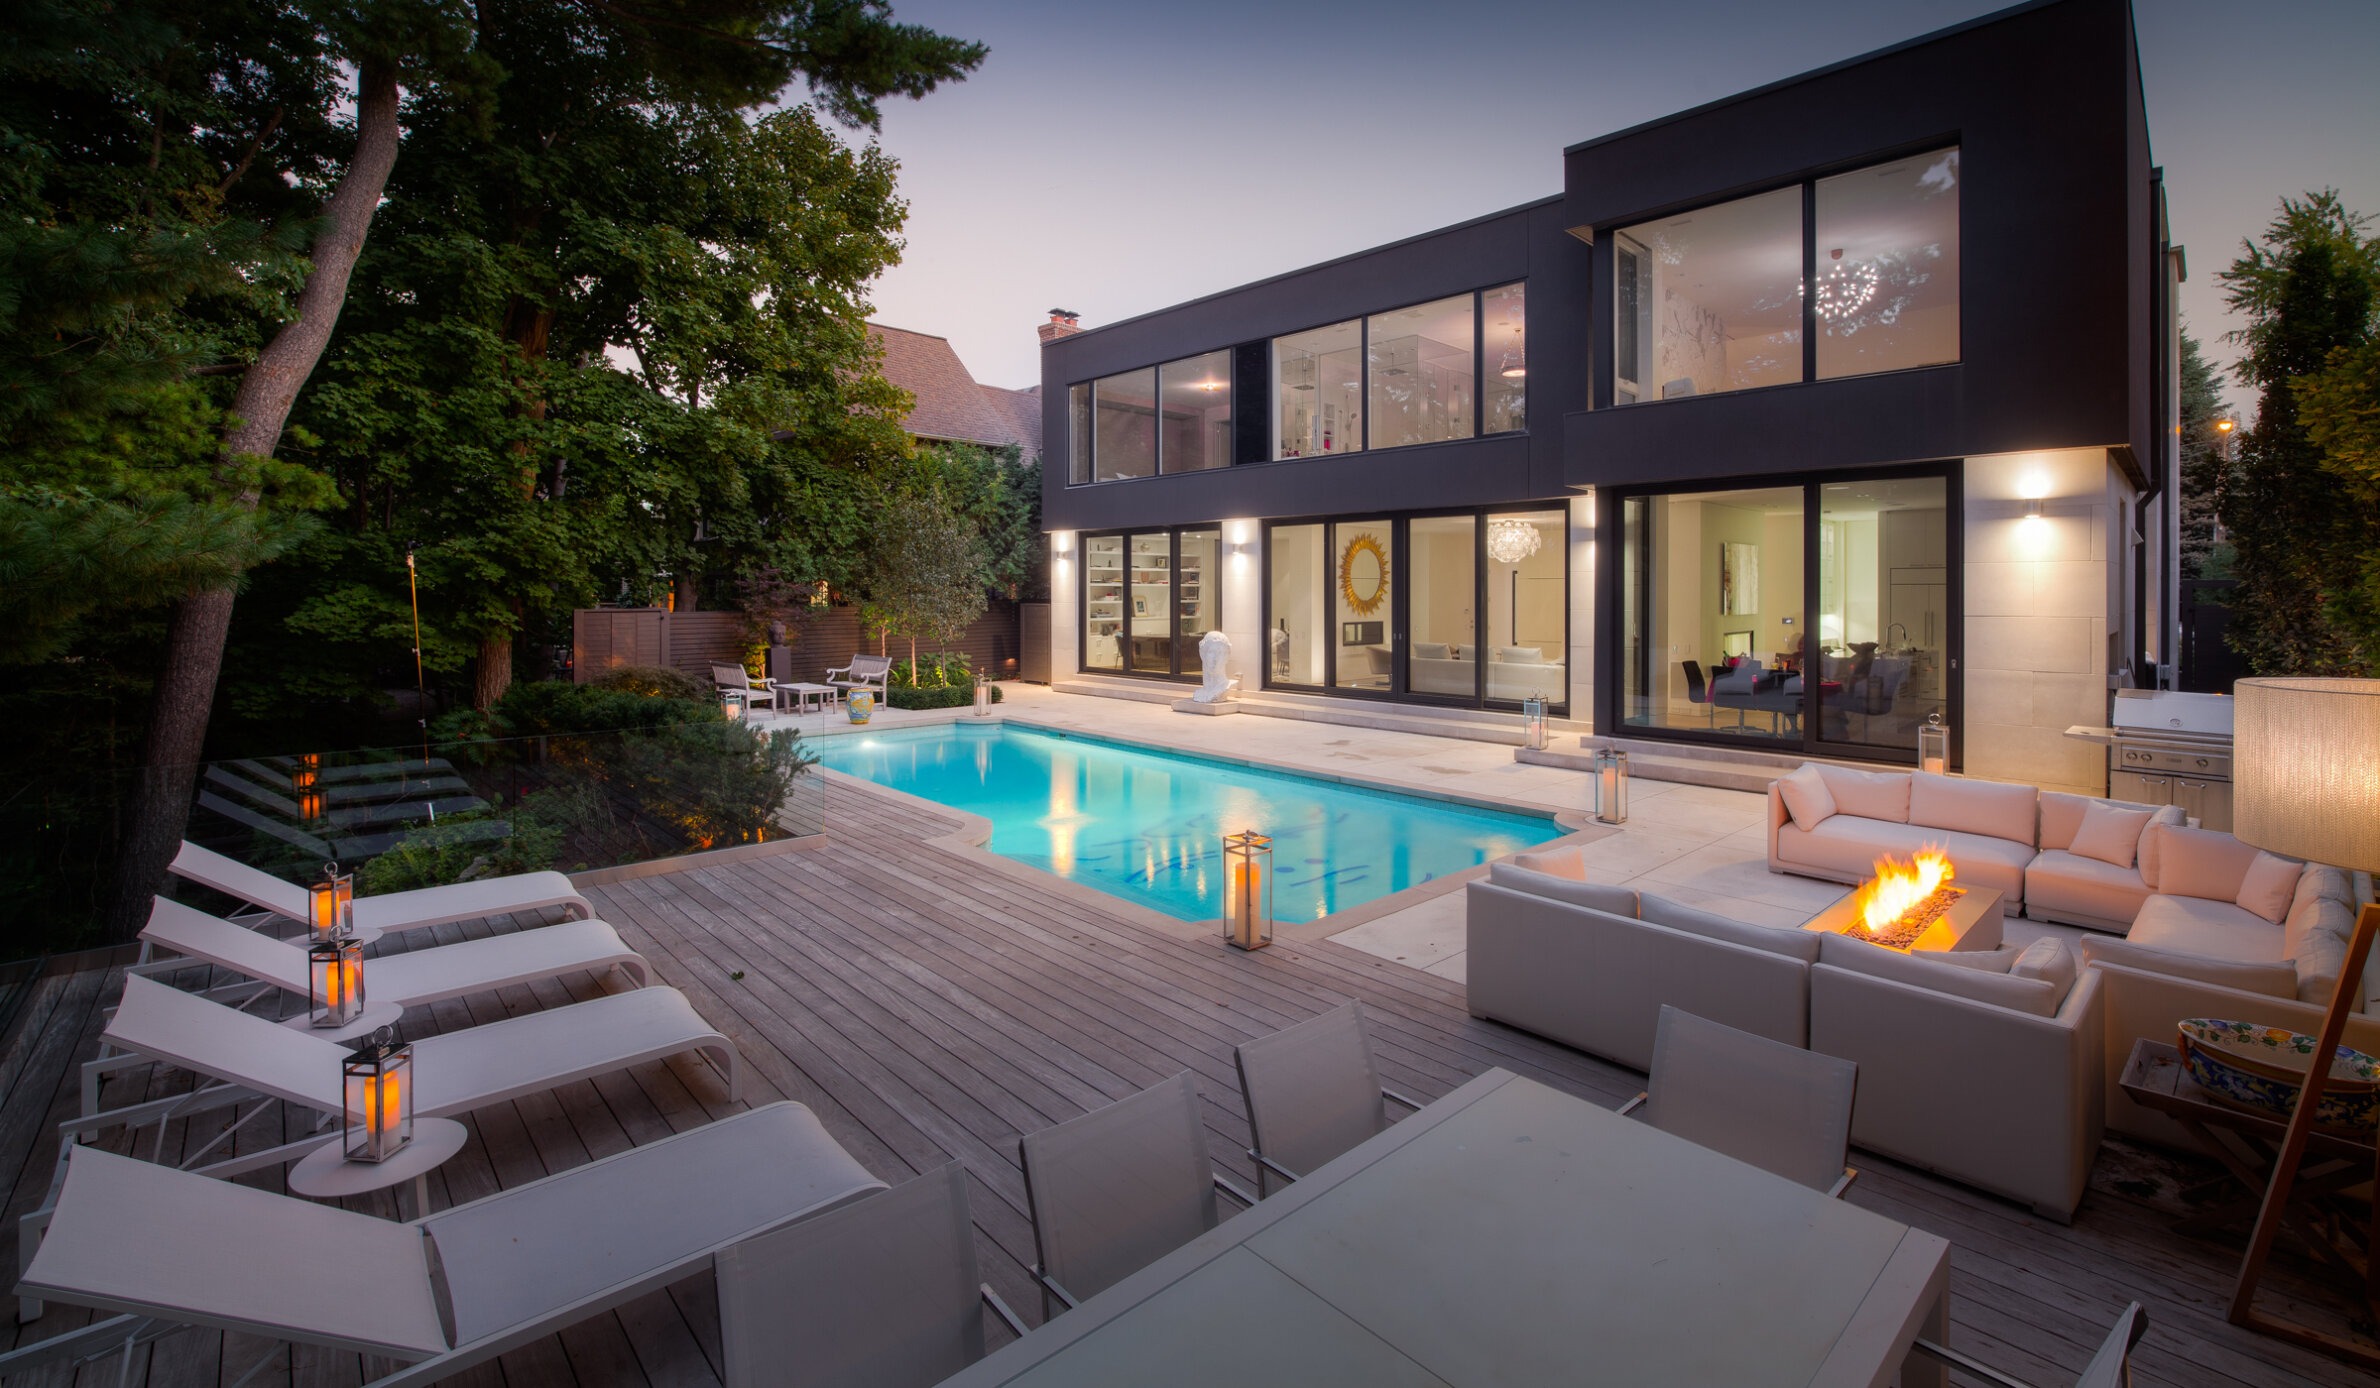 Modern house with large windows at dusk, featuring a swimming pool, outdoor seating with a fire pit, and lush surrounding greenery.